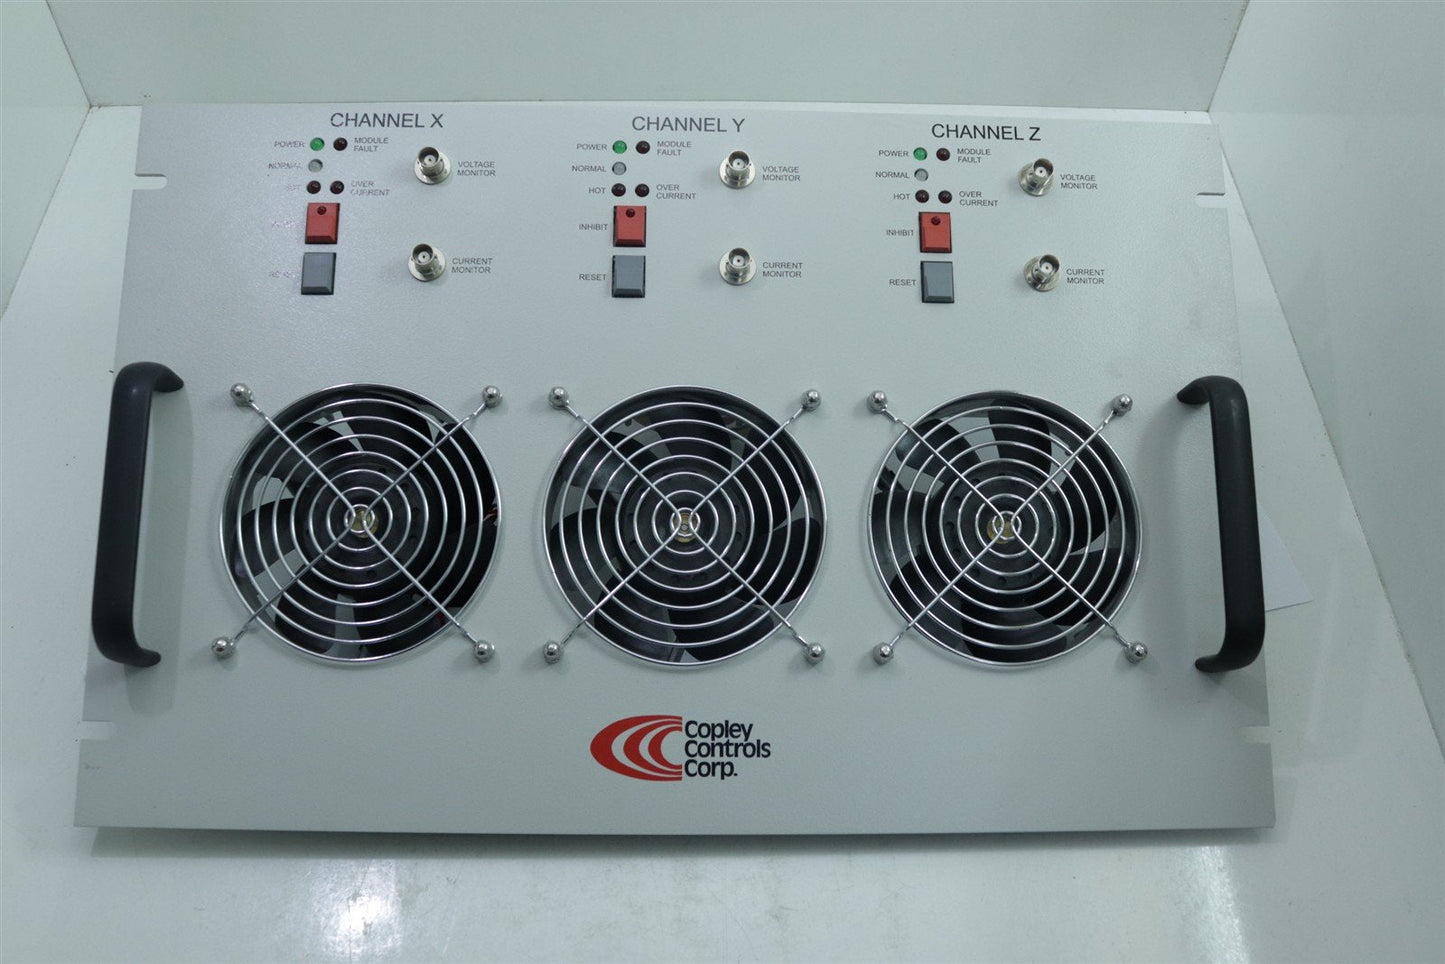 Copley Controls Gradient Amplifier Air Chamber panel